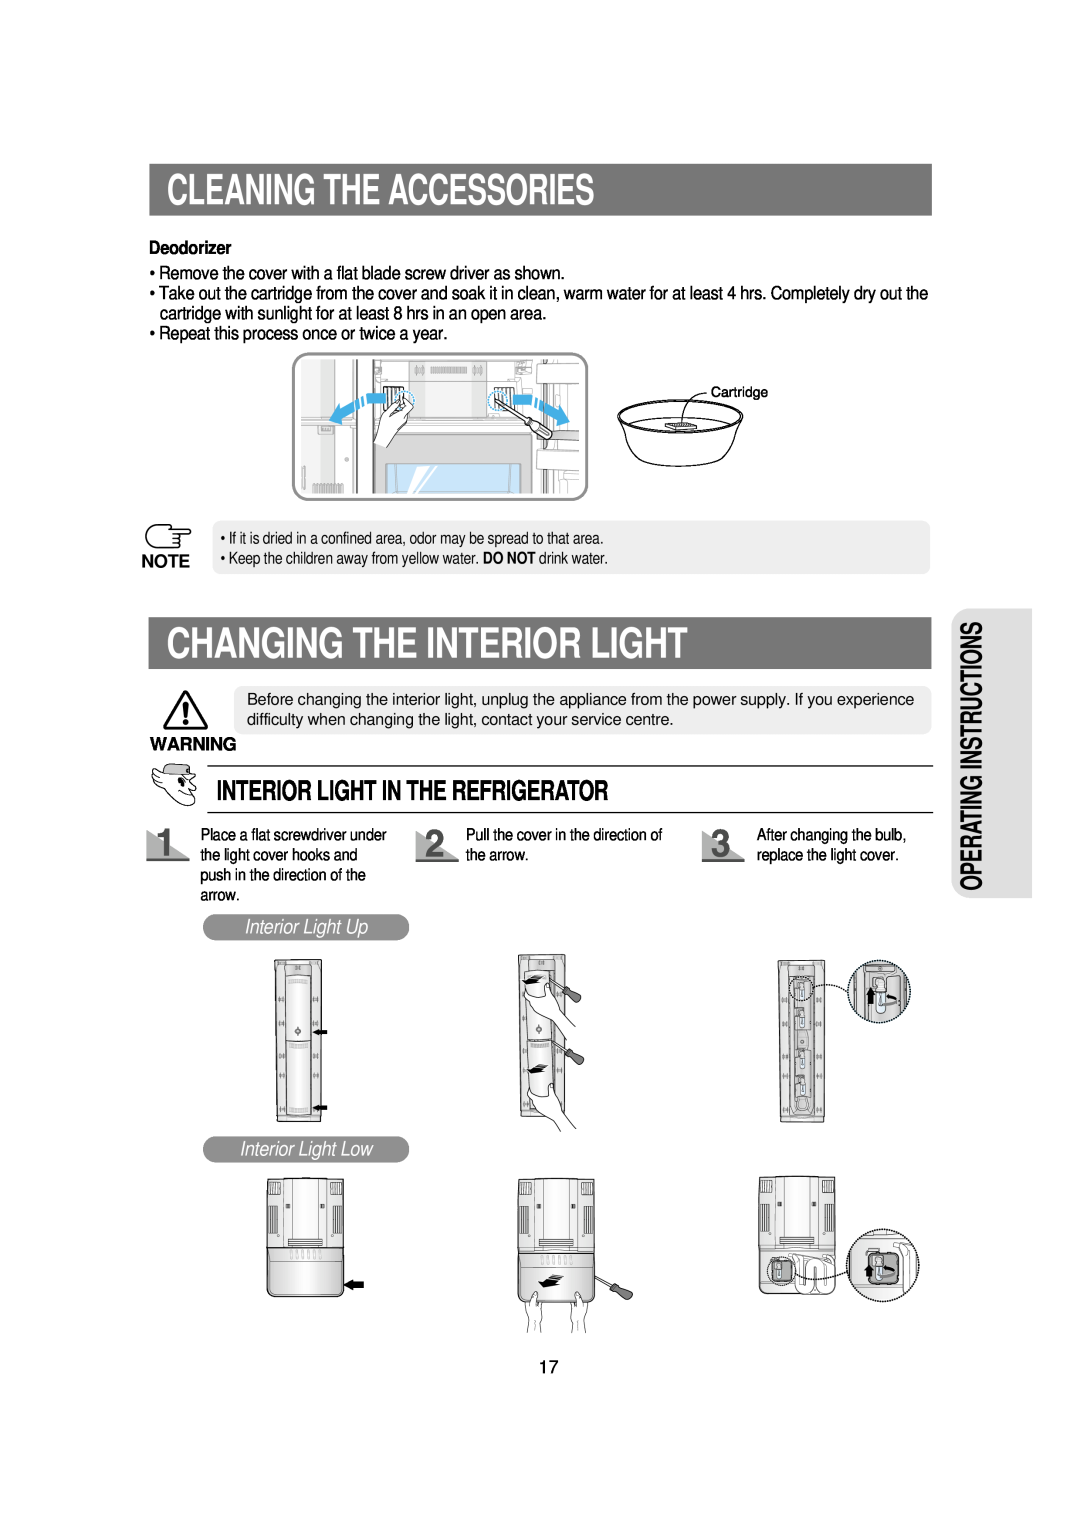 Samsung RSE8K, RSE8T Changing The Interior Light, Interior Light In The Refrigerator, Deodorizer, Cleaning The Accessories 